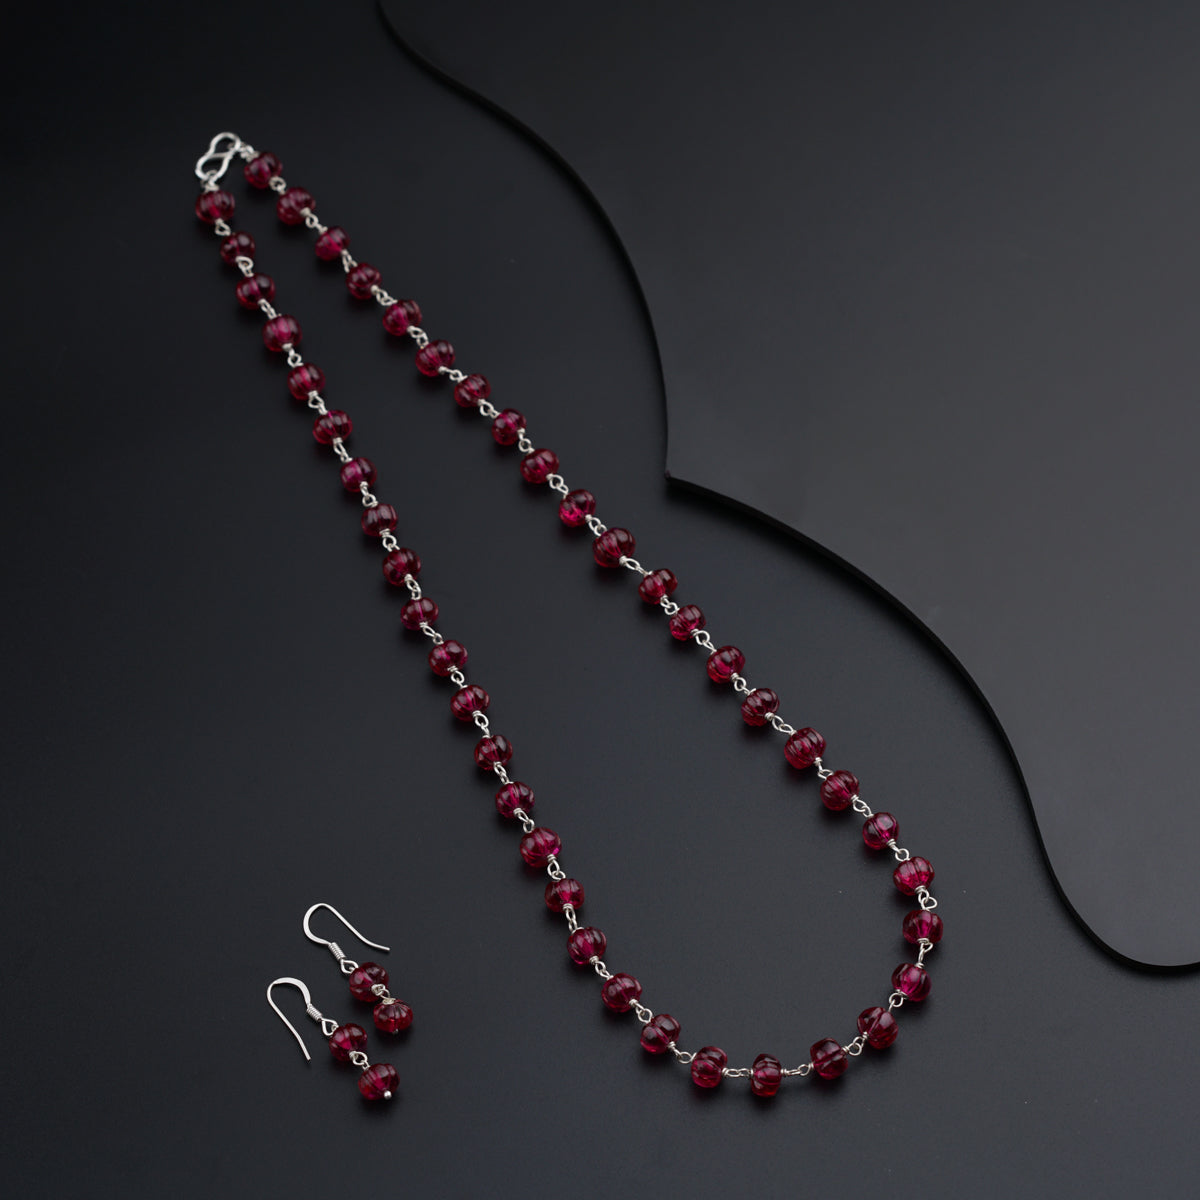 a necklace and earring set with red beads